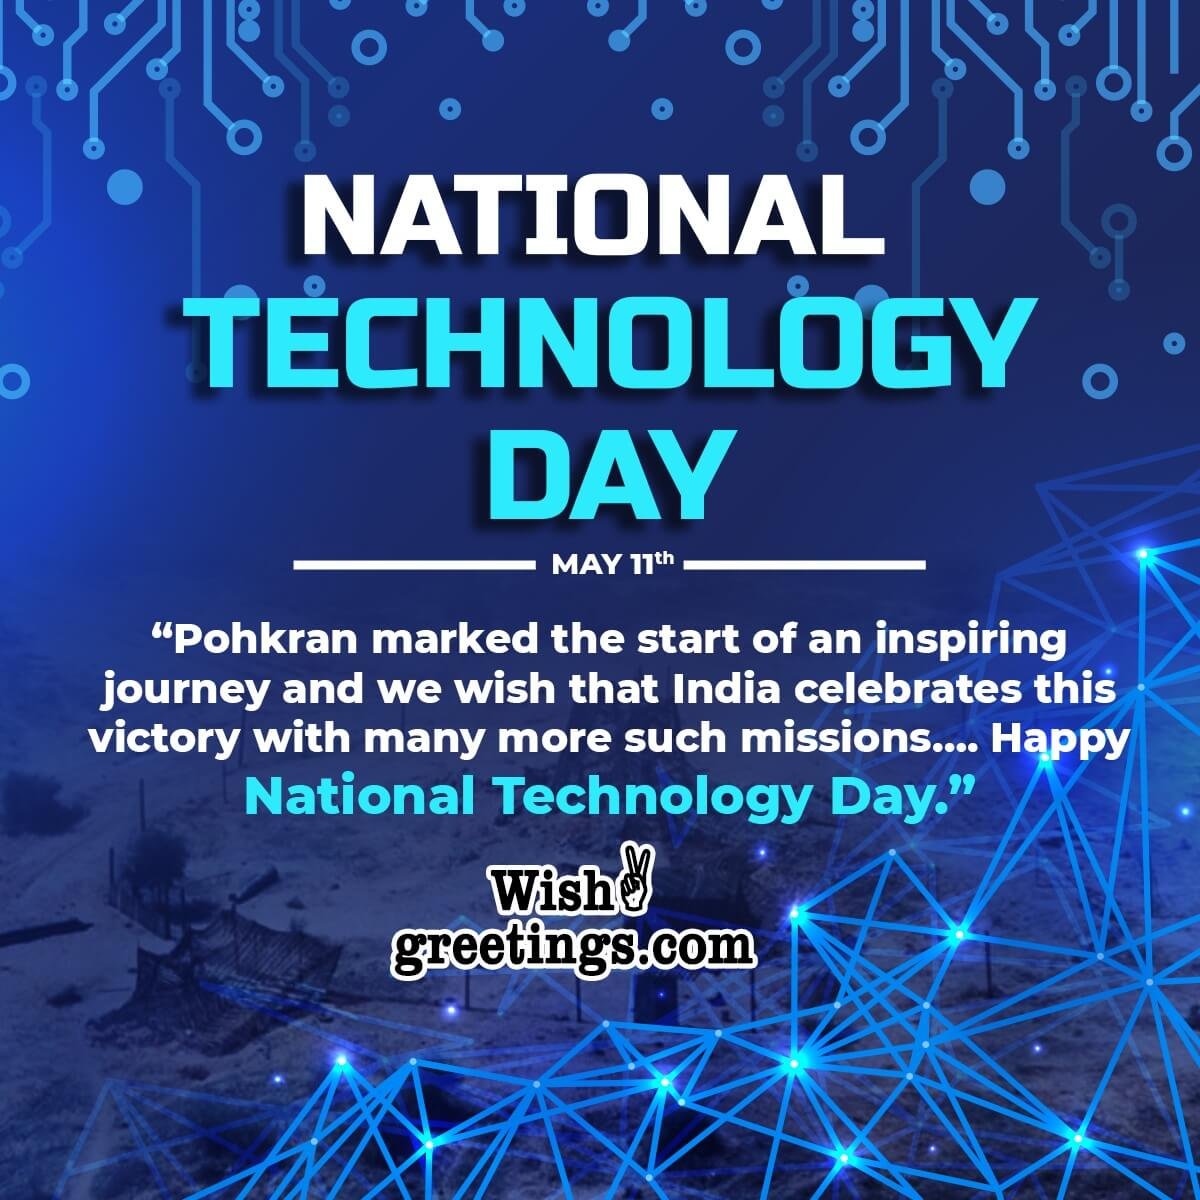 National Technology Day Wishes Messages Wish Greetings